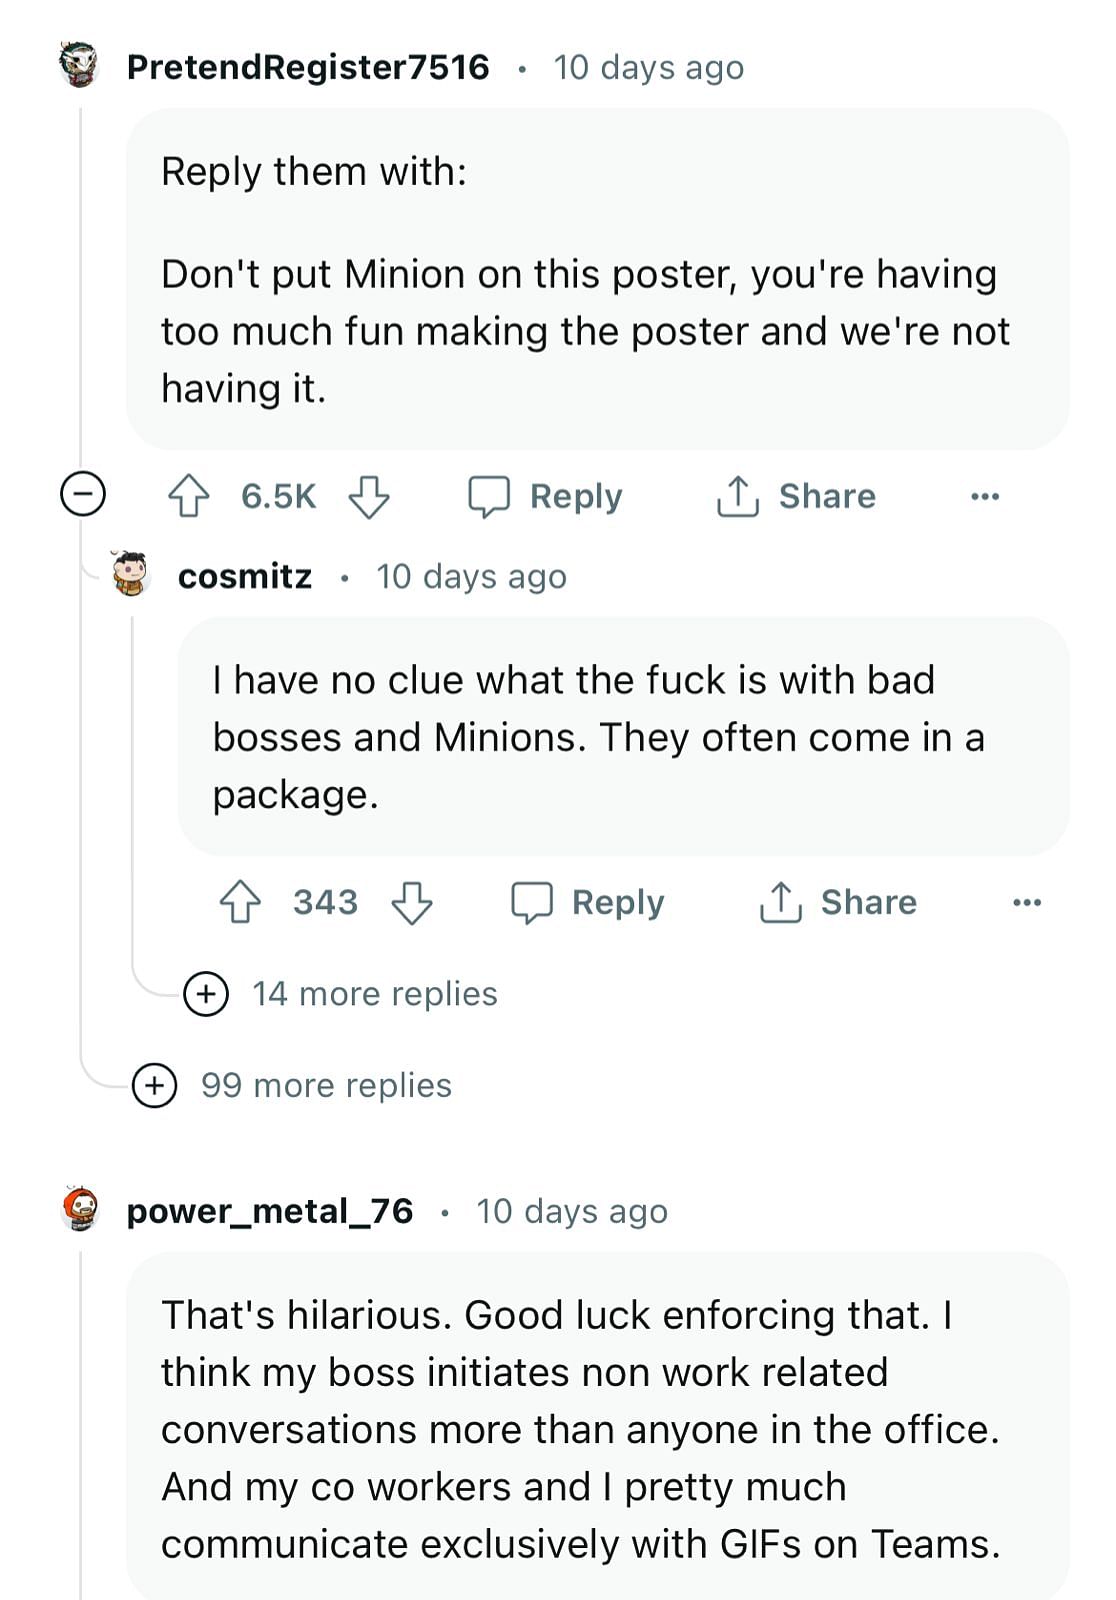 A Redditor commented under the viral post, "Ah yes, the famously disciplined, efficient and productive Minions..."